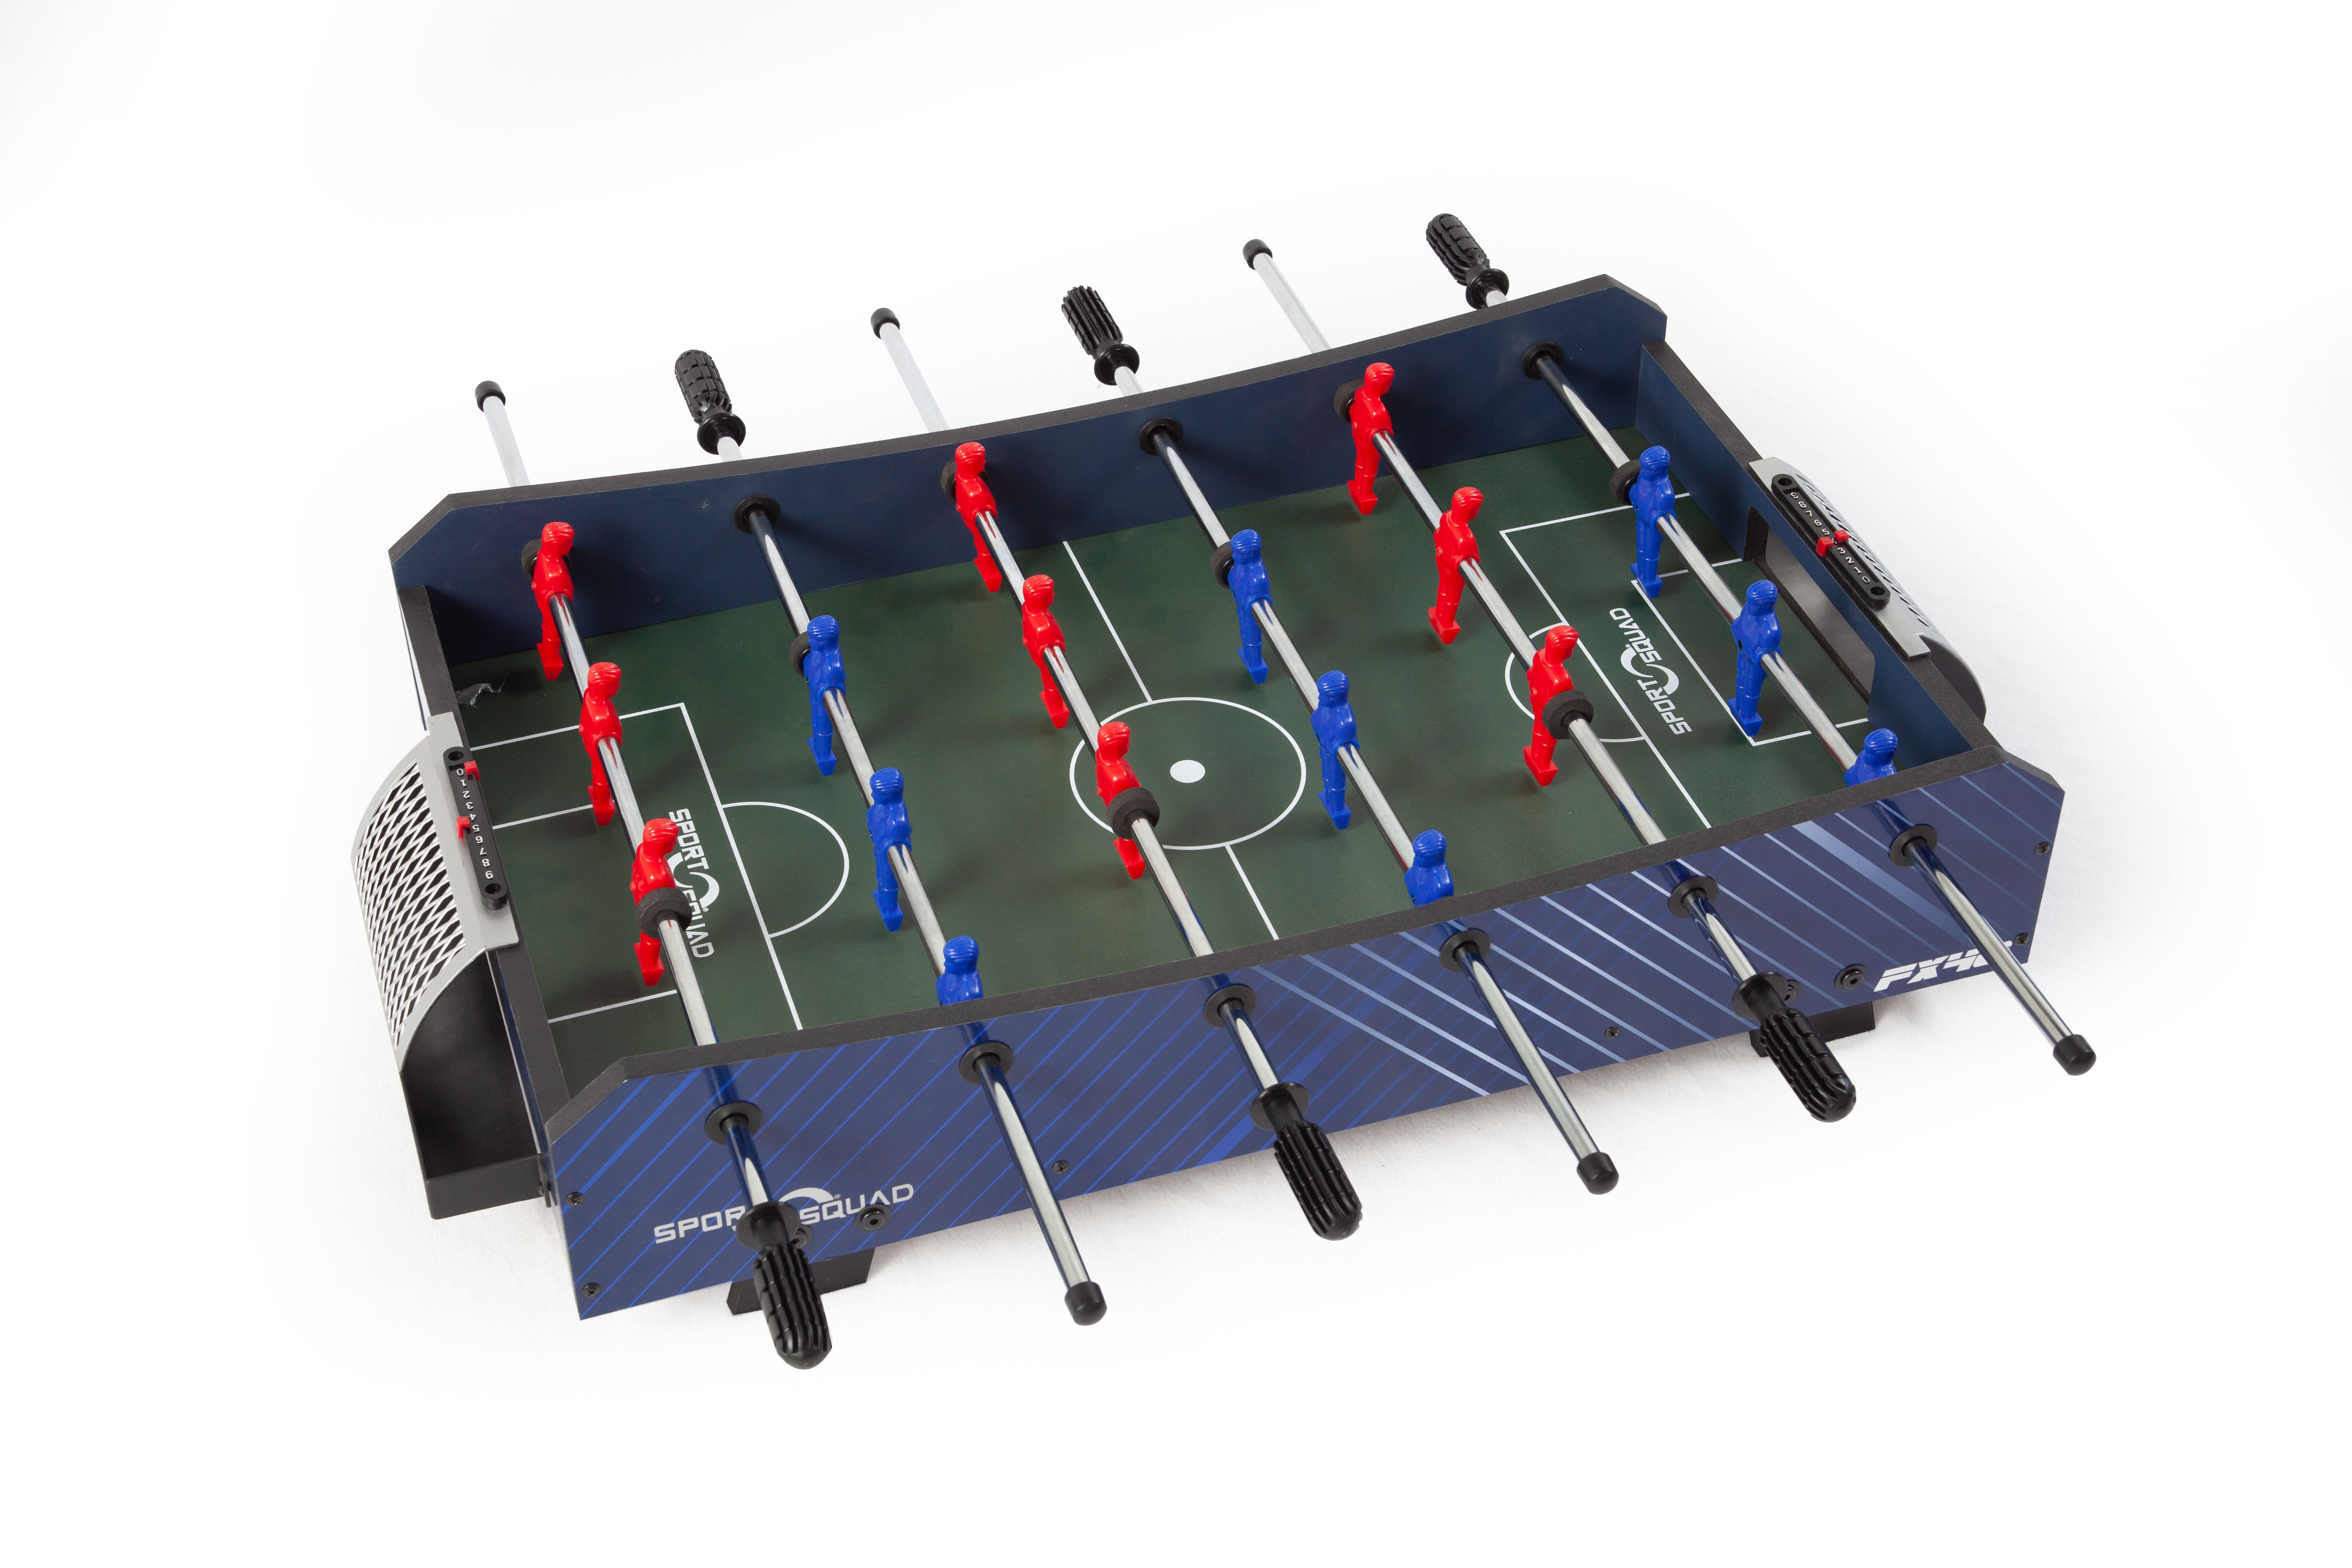 Sport Squad FX40 Compact Mini Tabletop Foosball Table, Blue - image 1 of 6